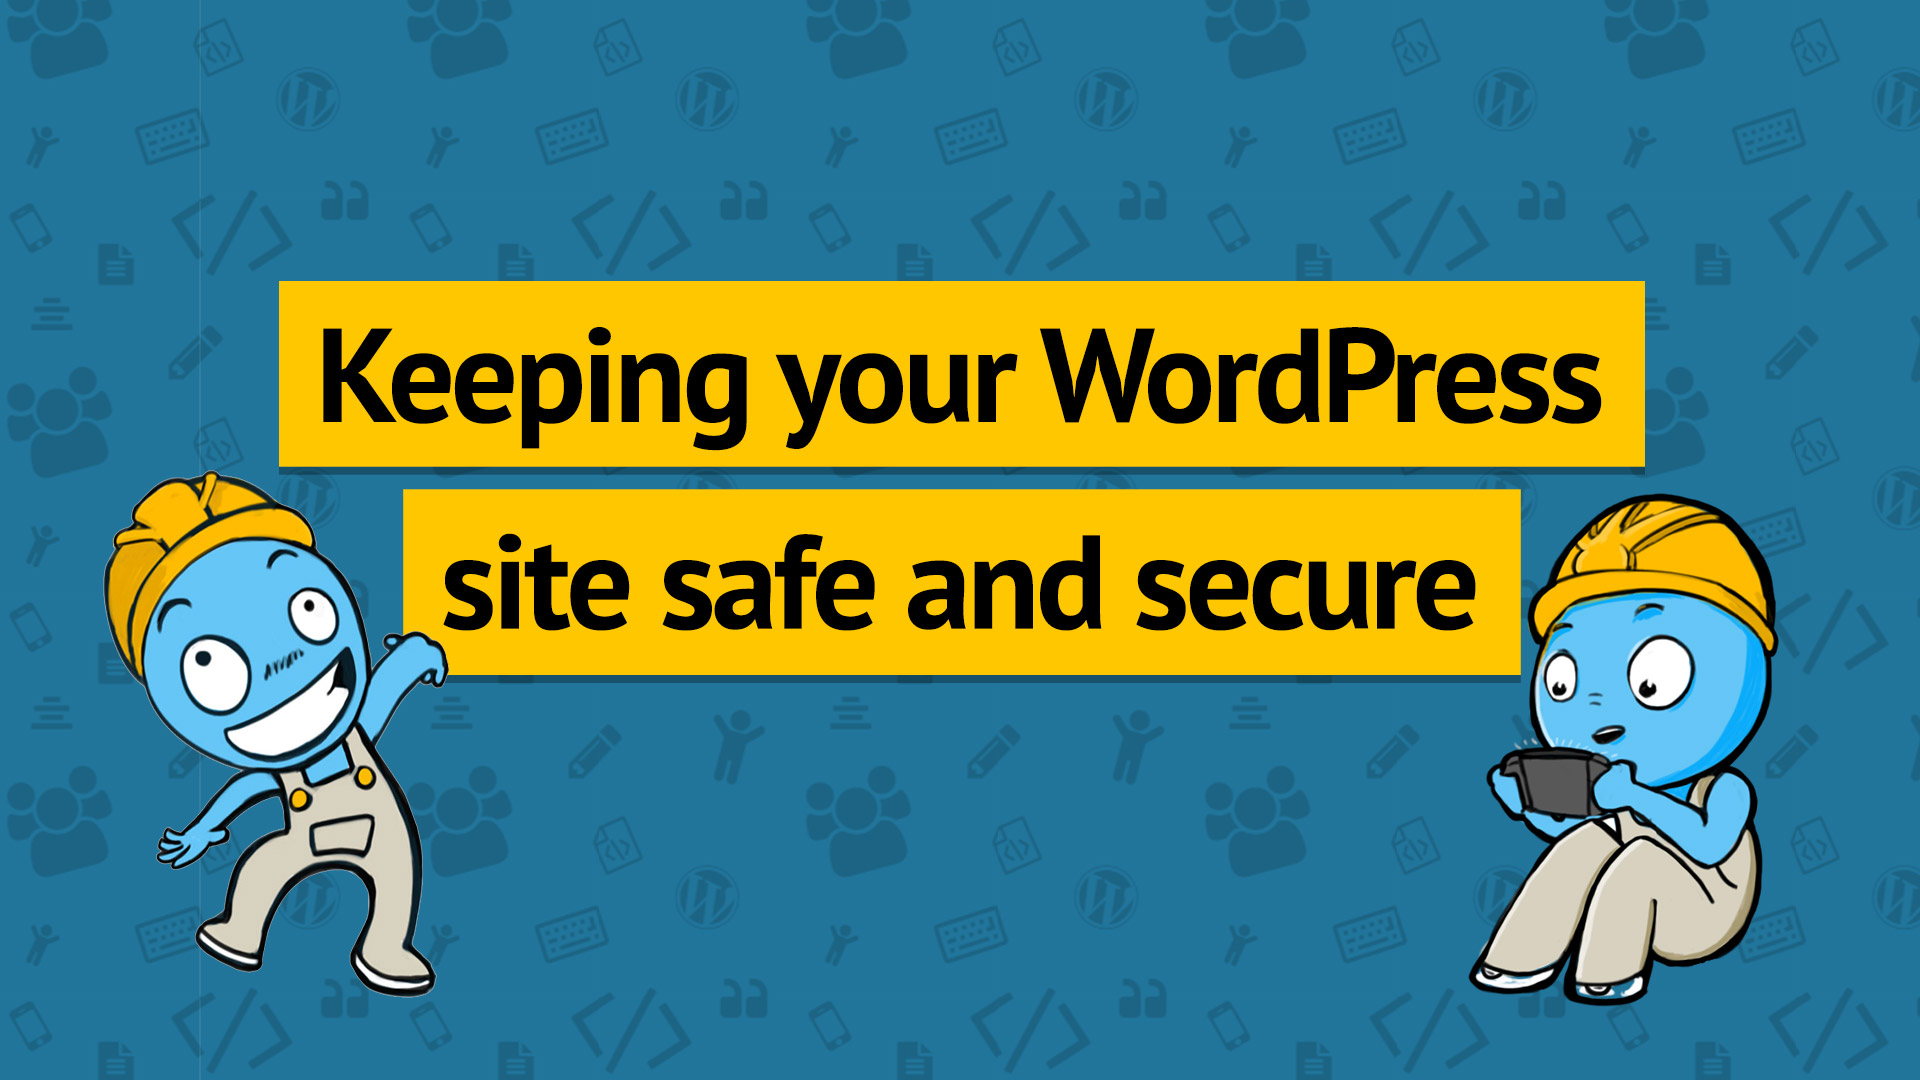 Keeping your WordPress site safe and secure